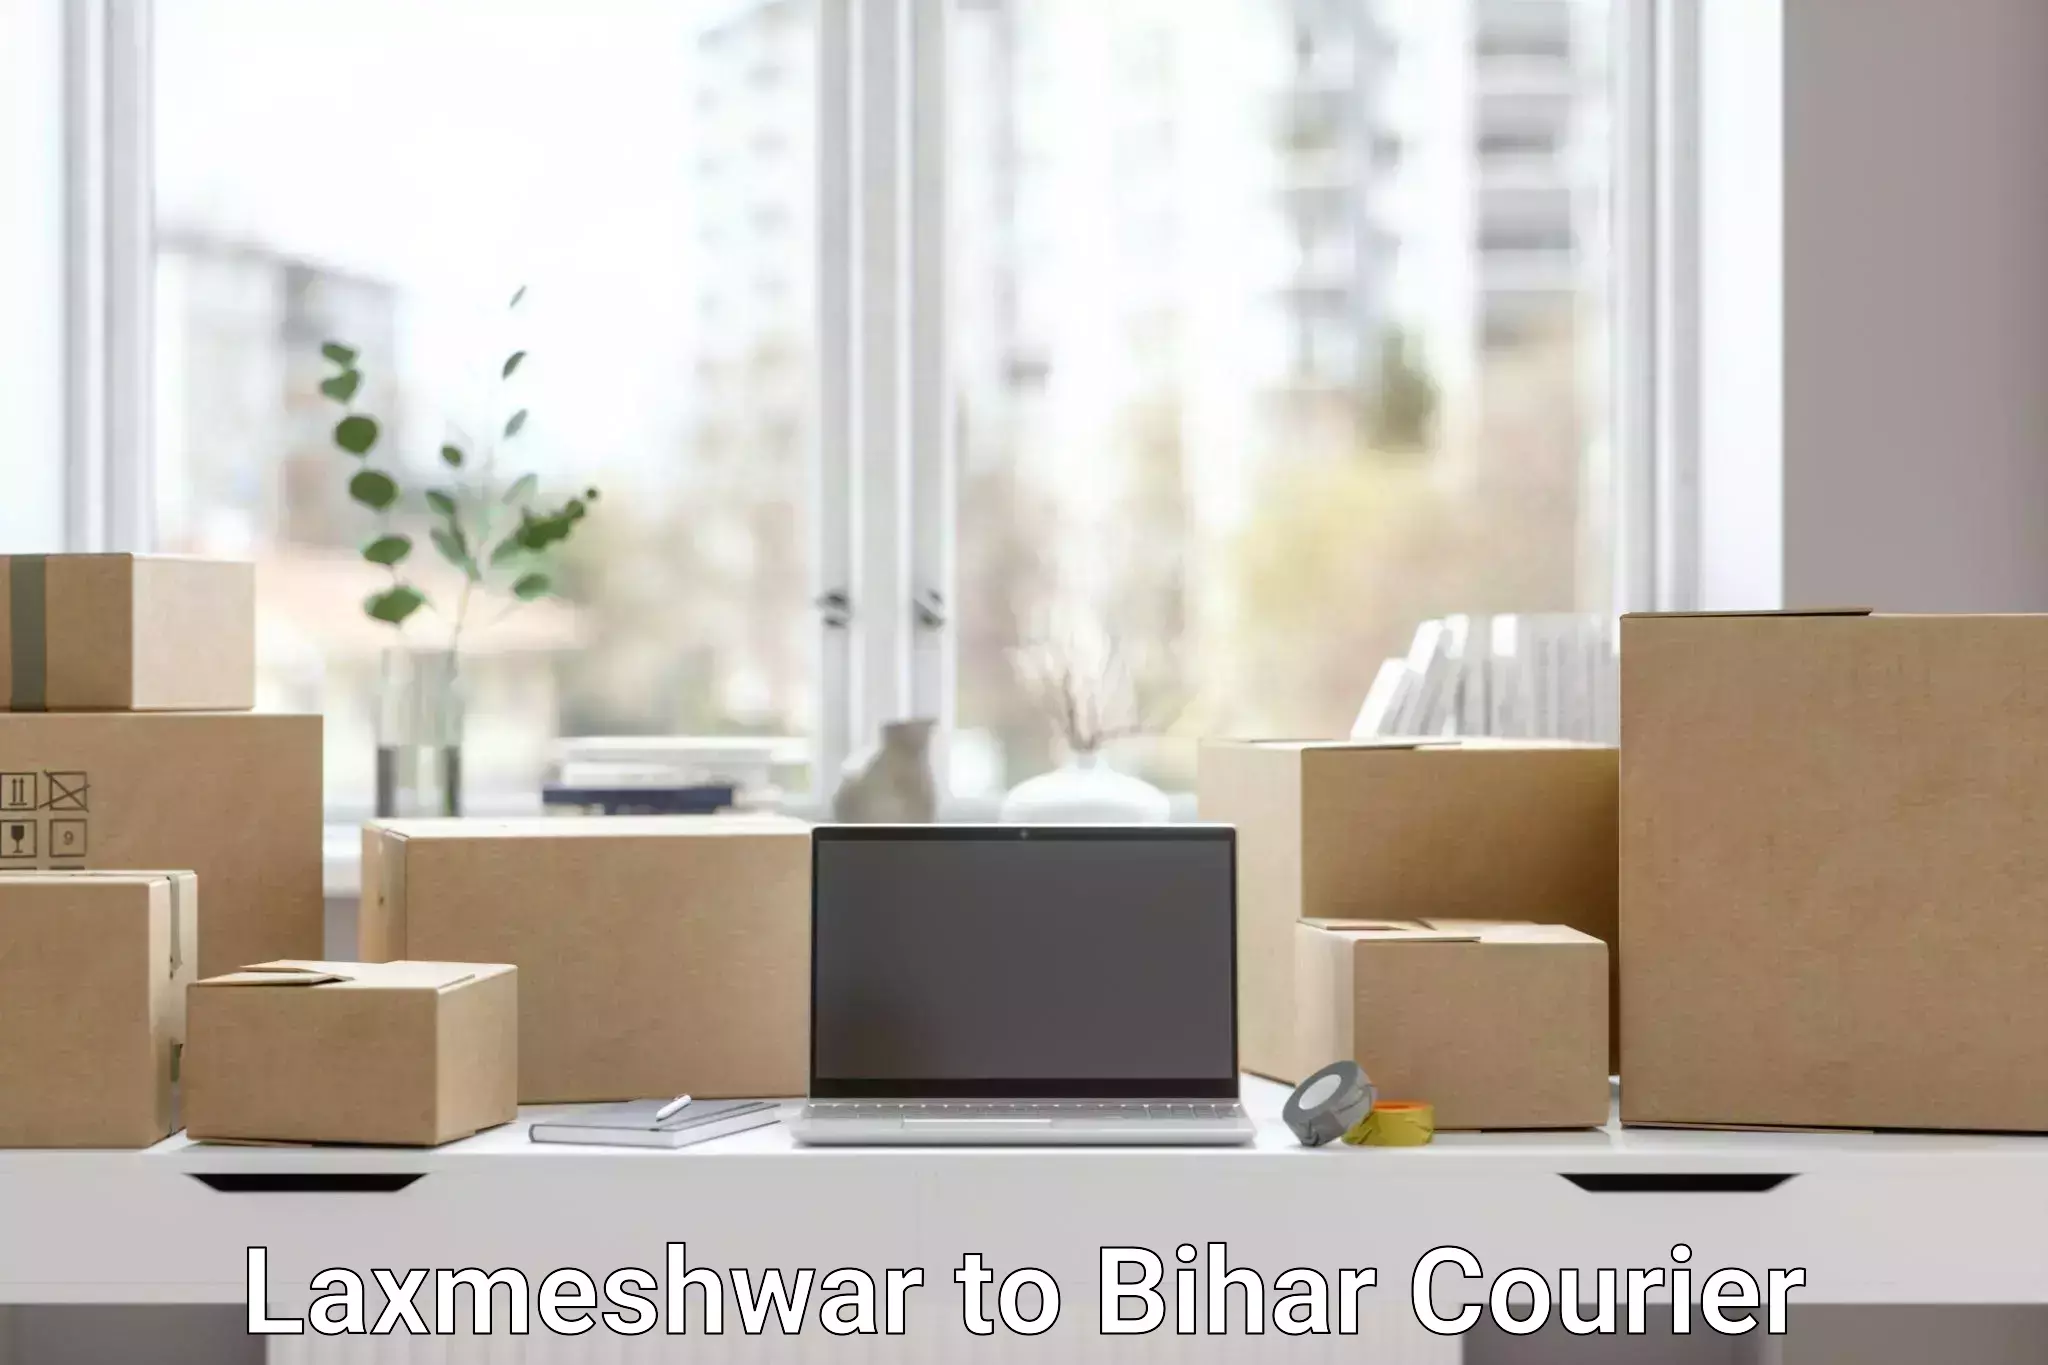 Business delivery service in Laxmeshwar to Khizarsarai